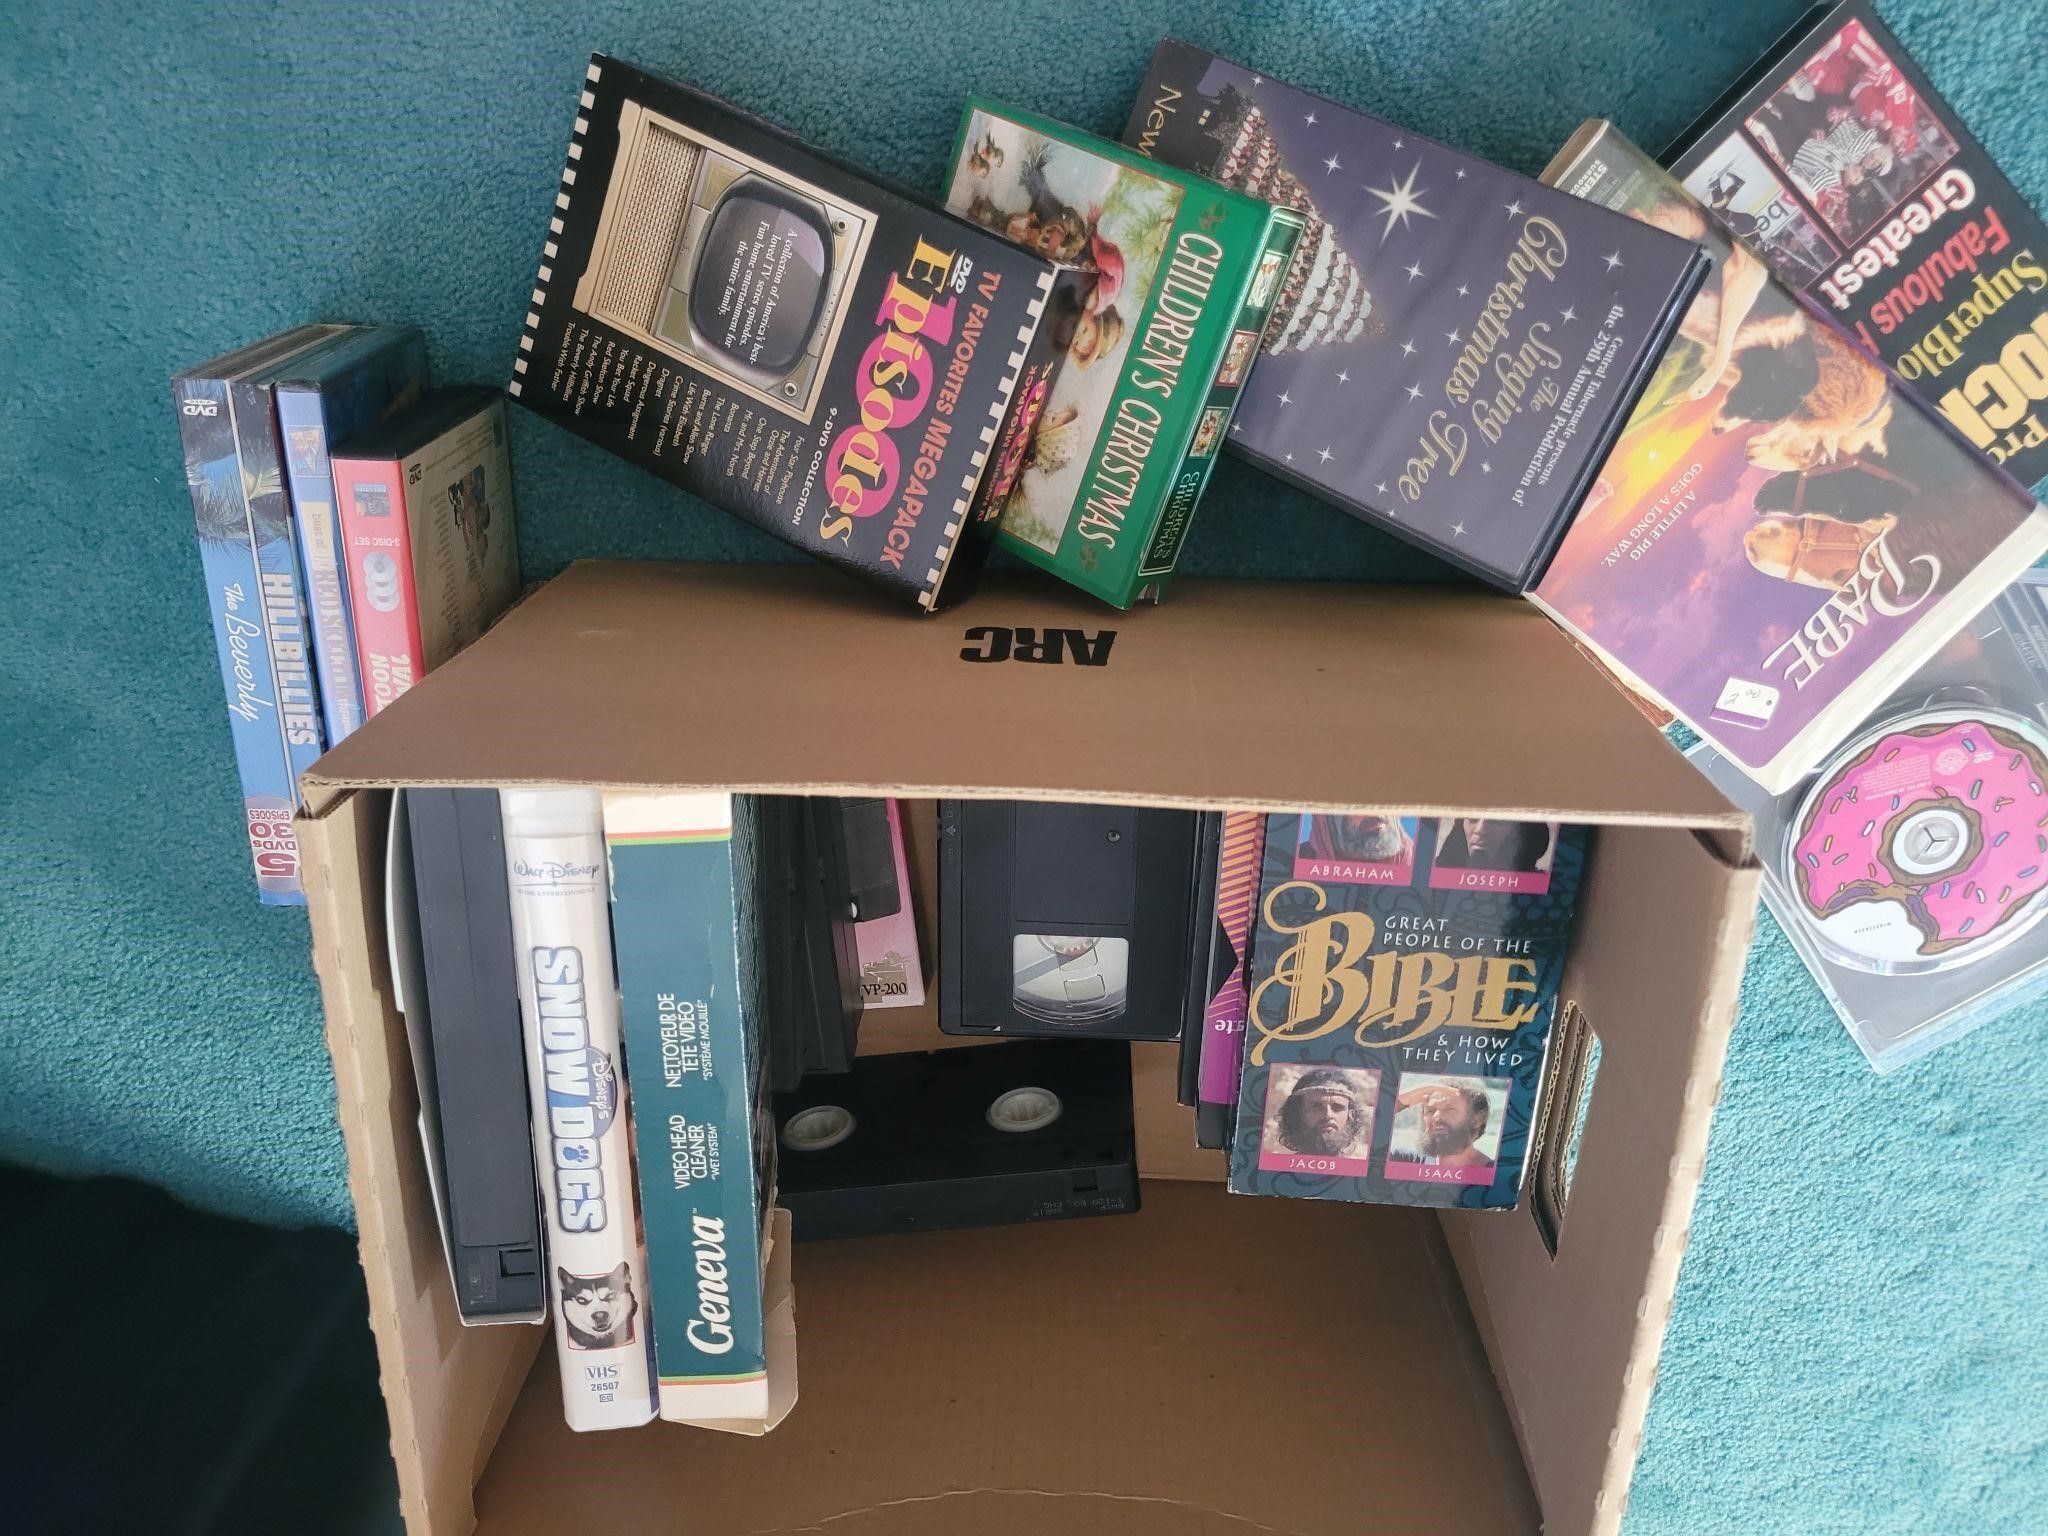 Lot of vhs and dvds and misc